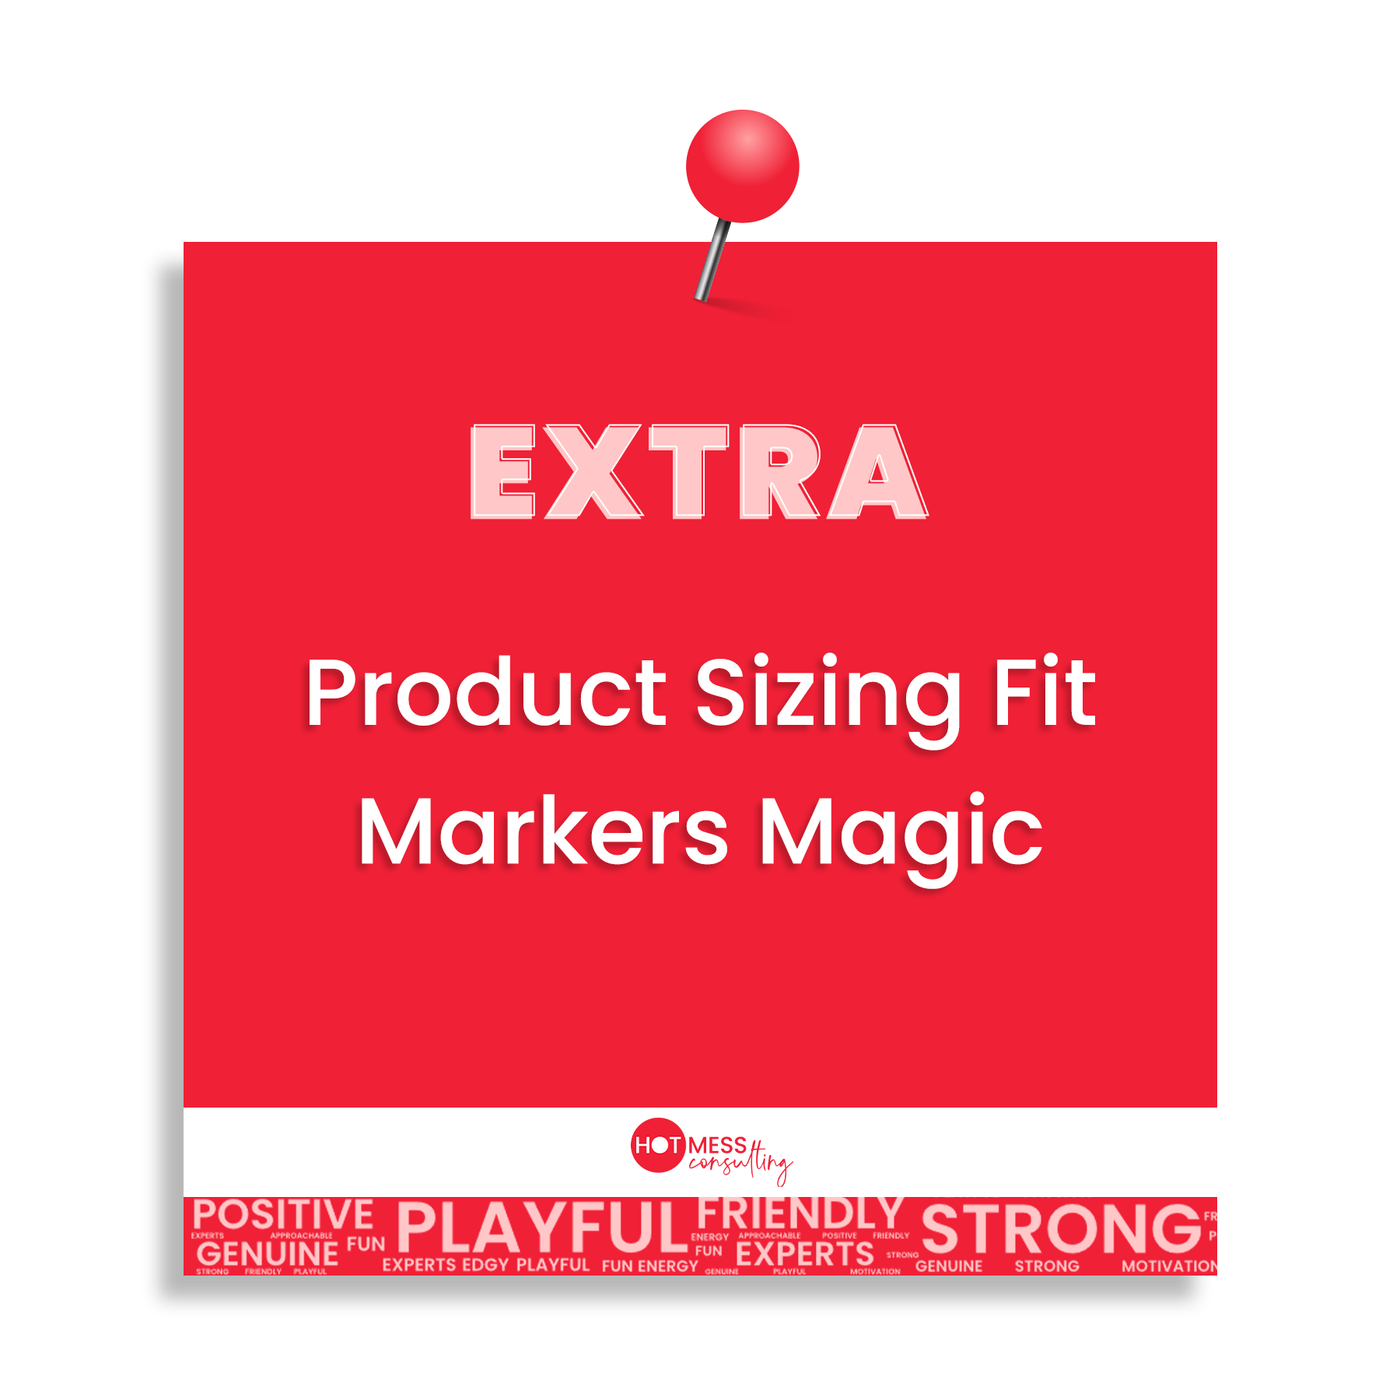 Product Sizing Fit Markers Magic